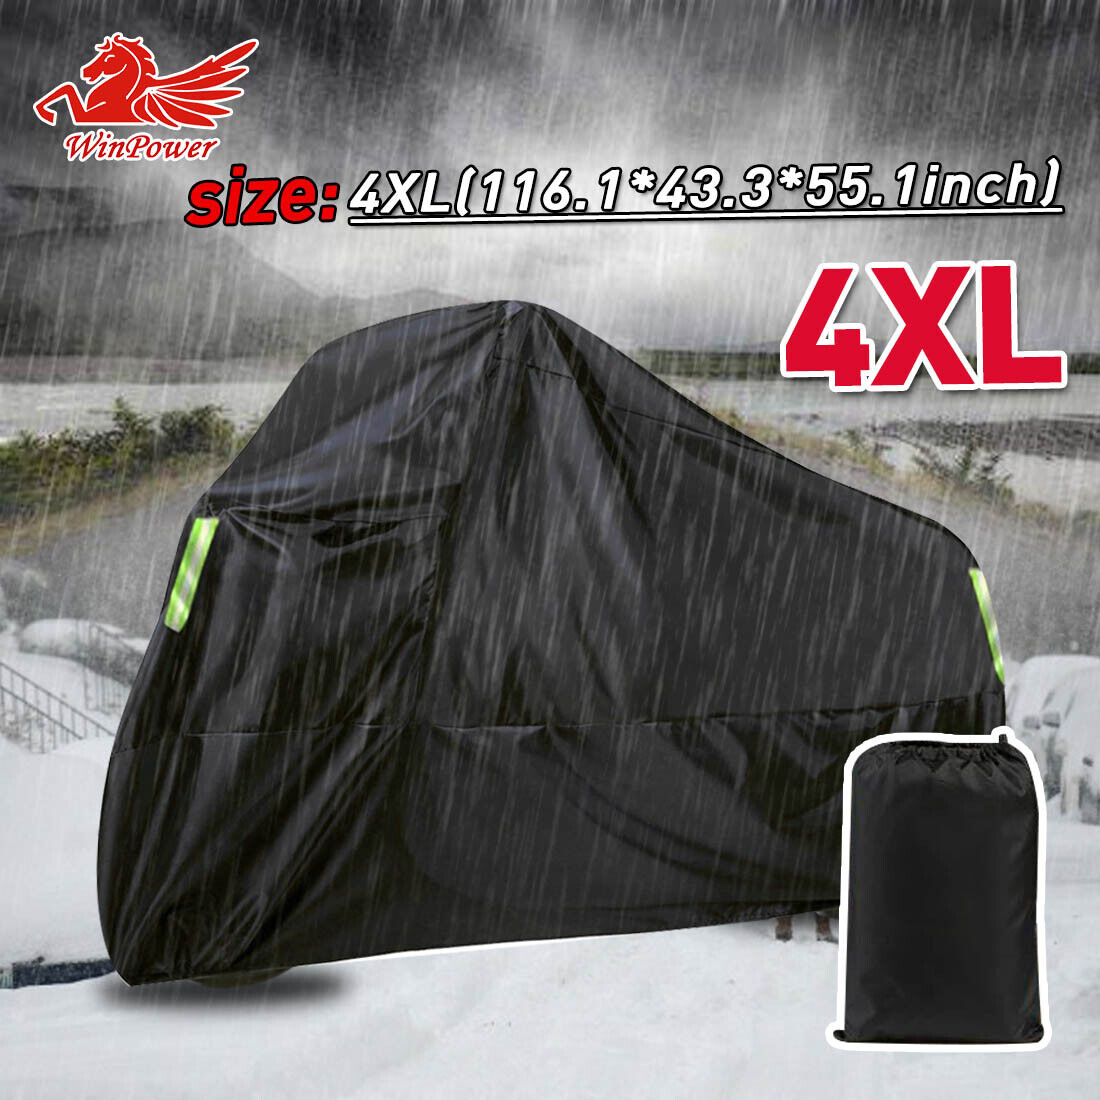 4XL Motorcycle Cover Waterproof For Winter Outside Storage Snow Rain